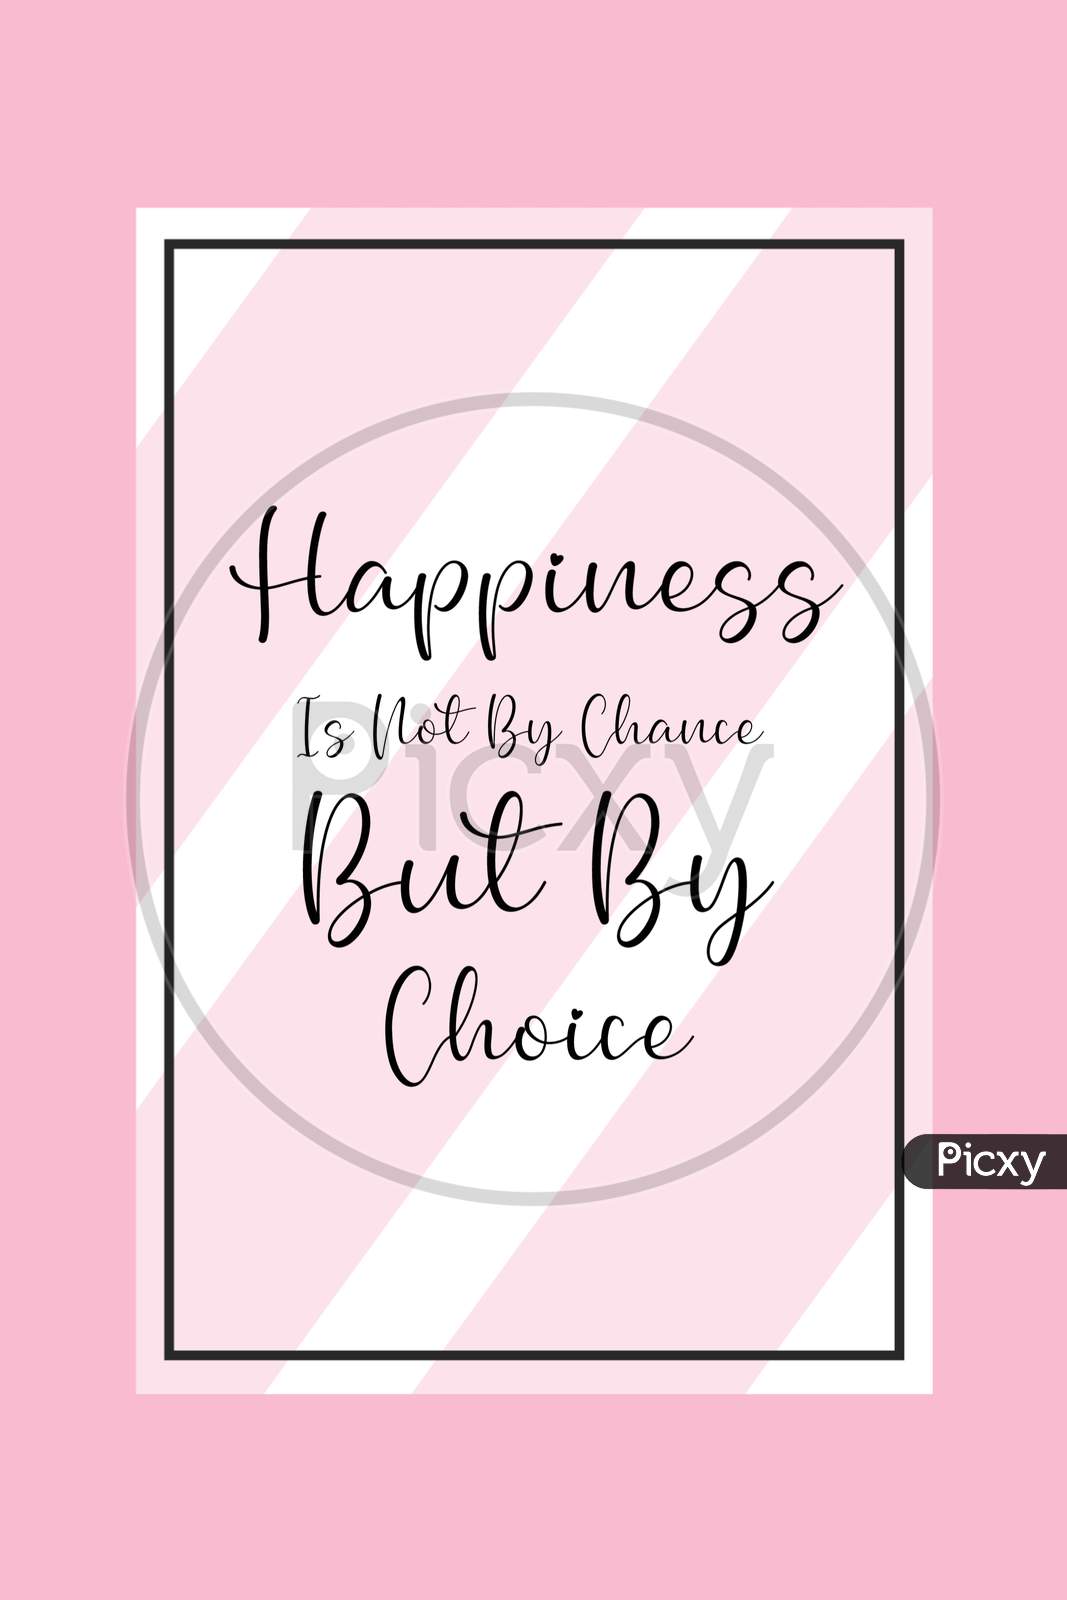 Happiness Is Not By Chance But By Choice (pink background with black color fonts)